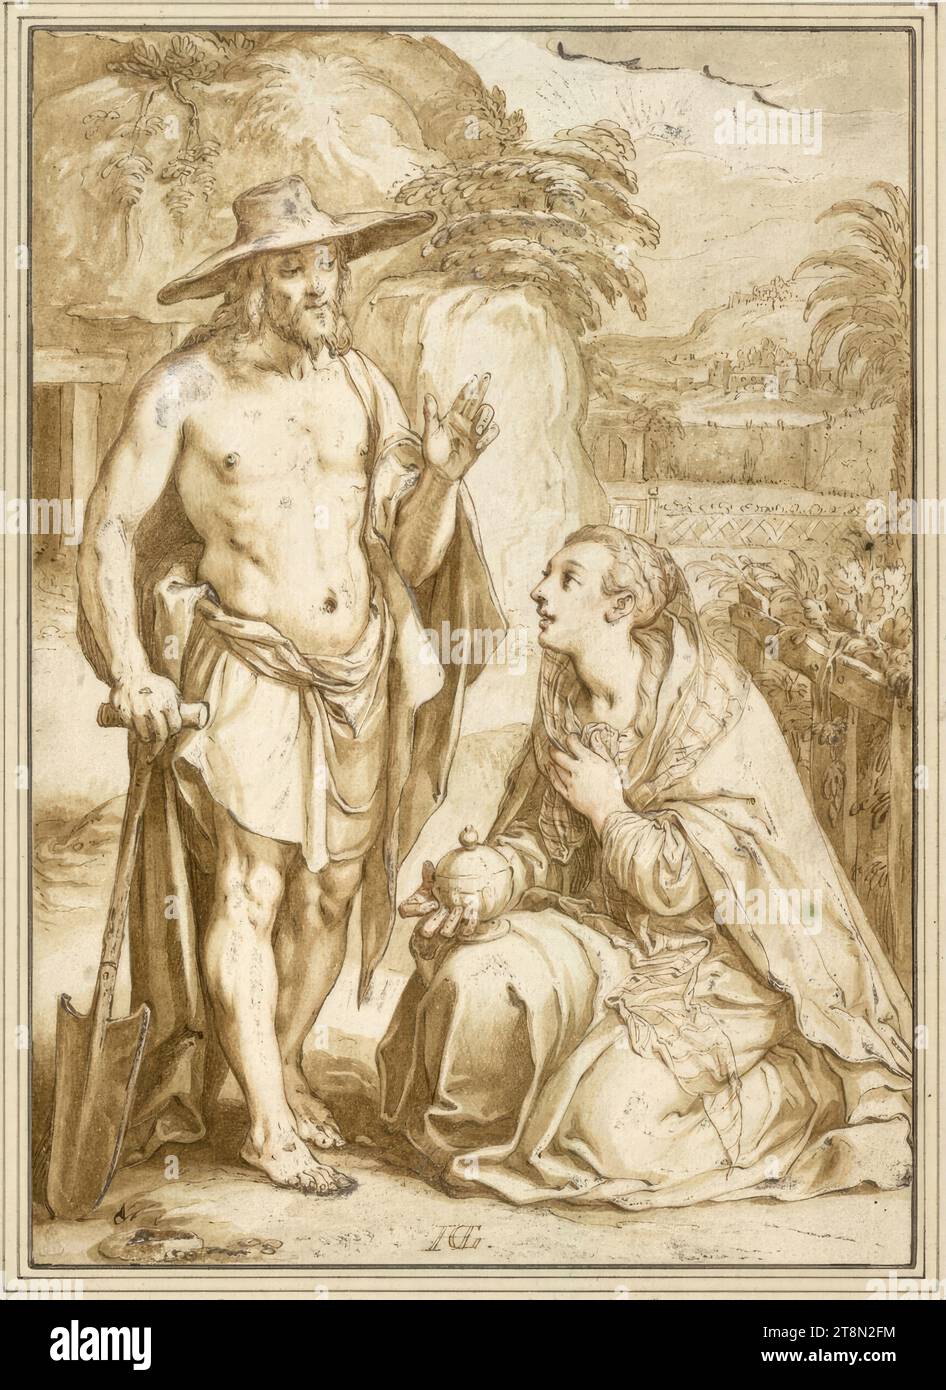 Noli me tangere, Hendrick Goltzius (Bracht near Venlo 1558 - 1617 Haarlem), drawing, pen and ink in brown and black, brown and reddish wash, heightened with white, 25.9 x 18.4 cm, l. and Duke Albert of Saxe-Teschen Stock Photo